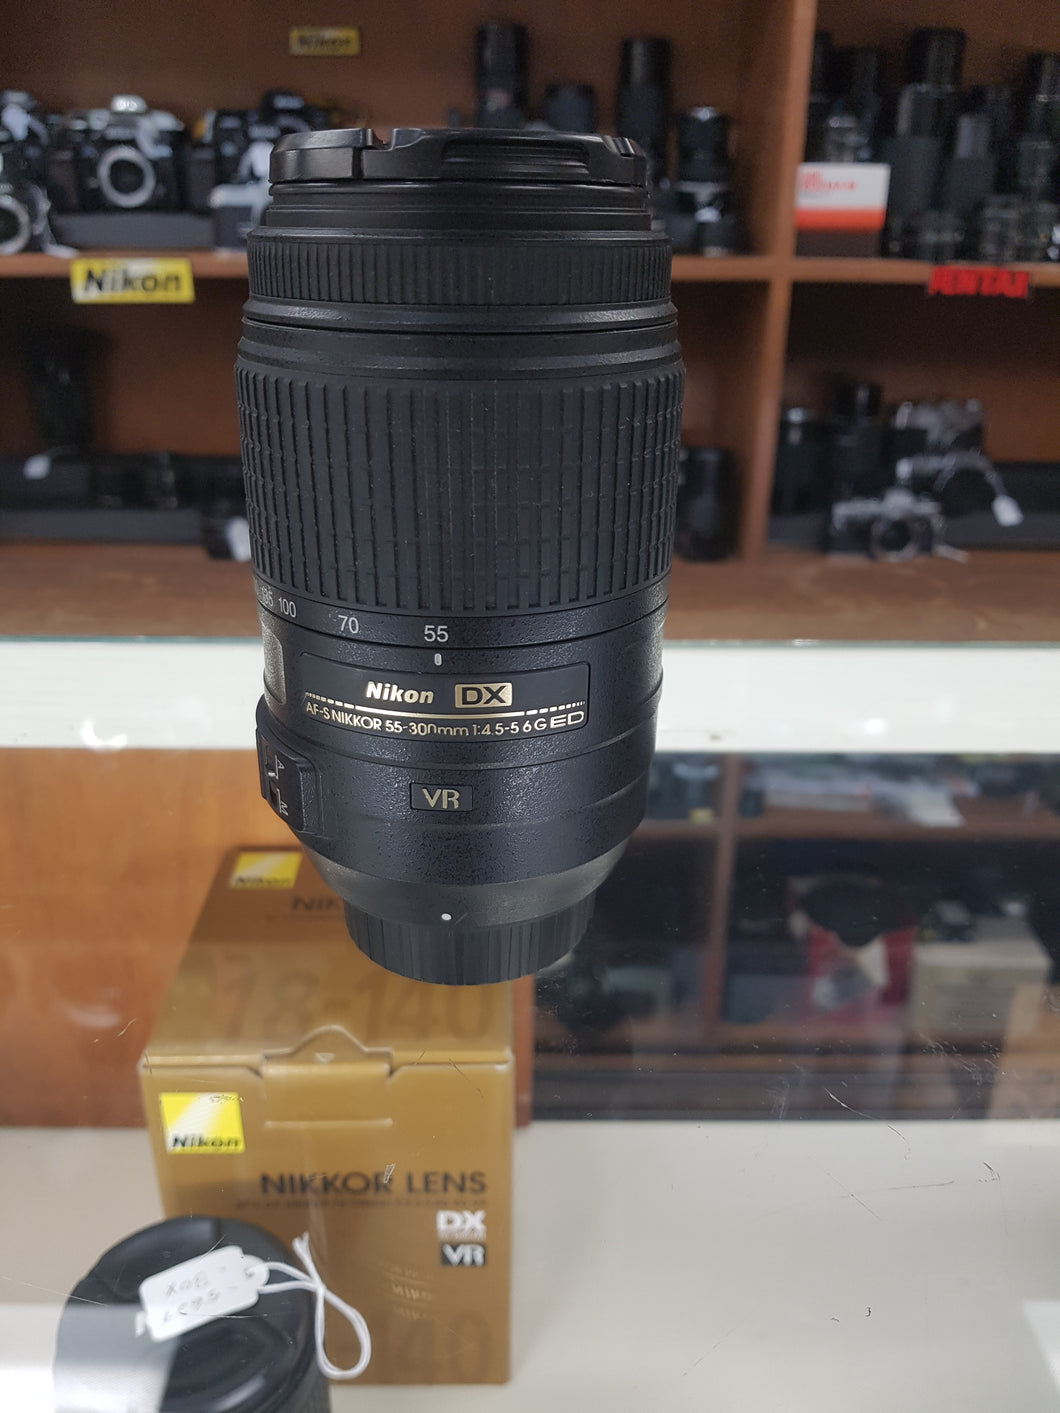 AF-S DX Nikon 55-300mm f/4.5-5.6G ED VR Lens - Used Condition 9/10 - Paramount Camera & Repair